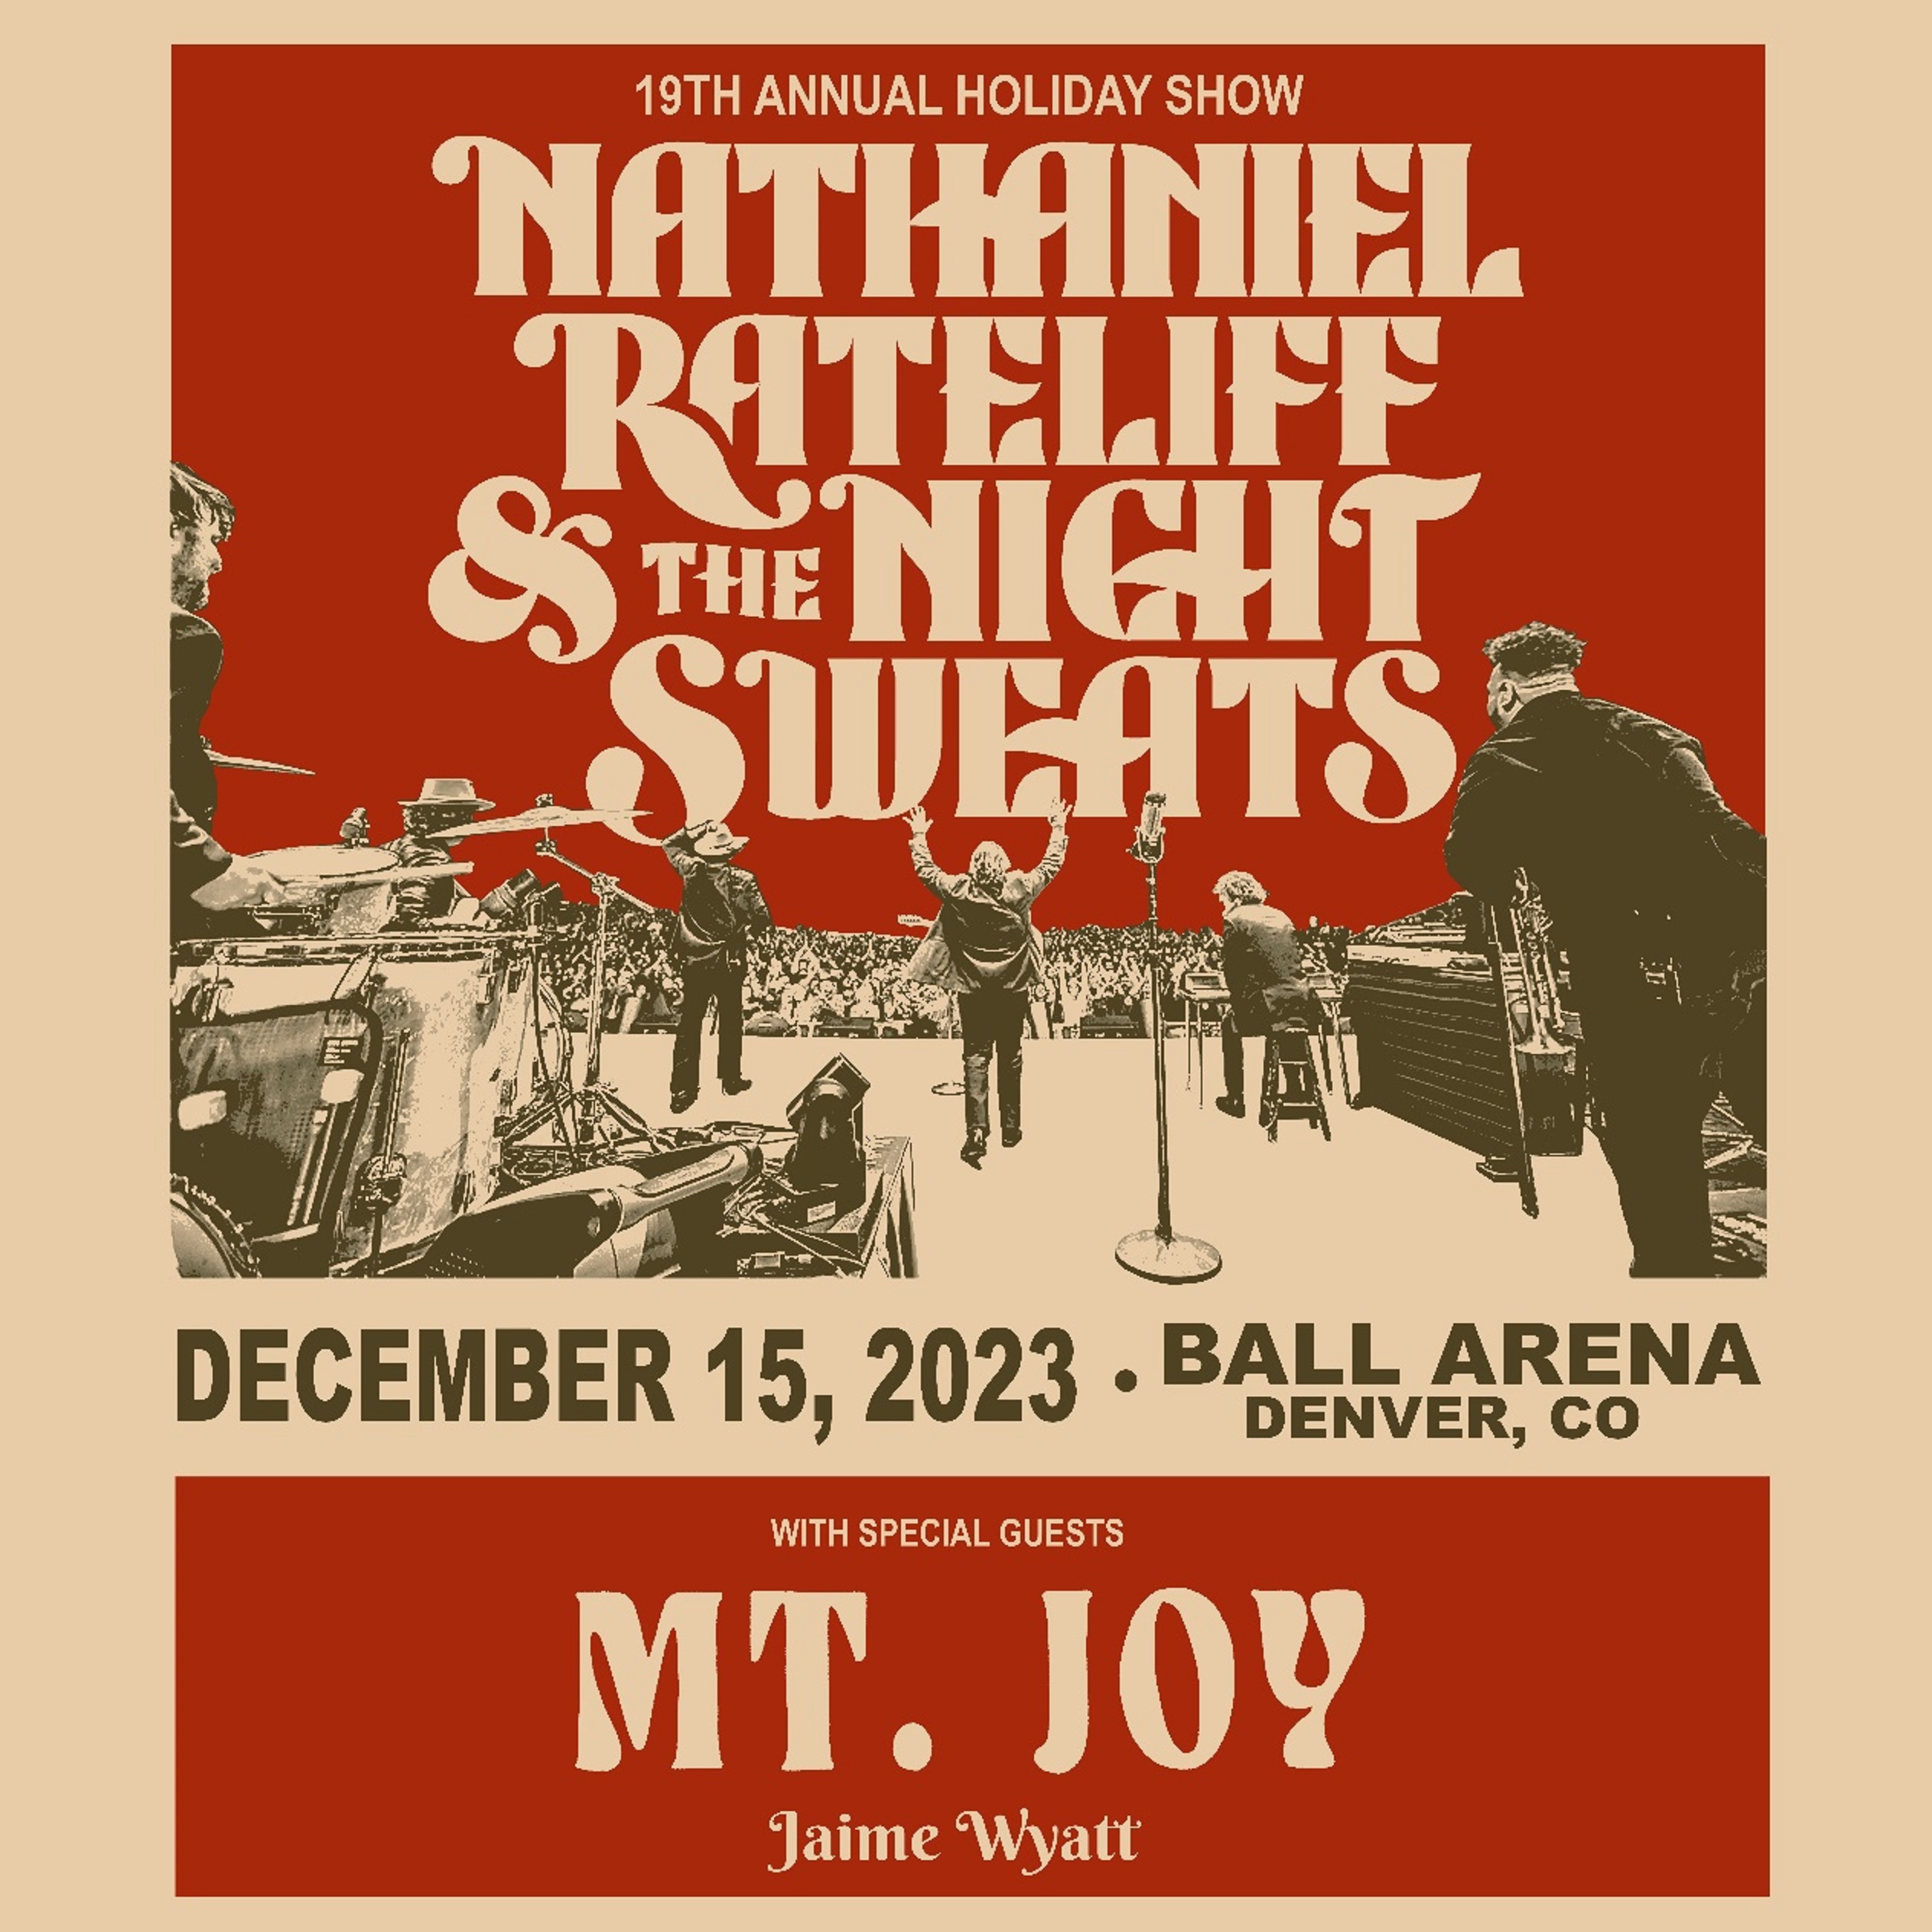 Nathaniel Rateliff & The Night Sweats return to Ball Arena for their 19th Annual Holiday Show